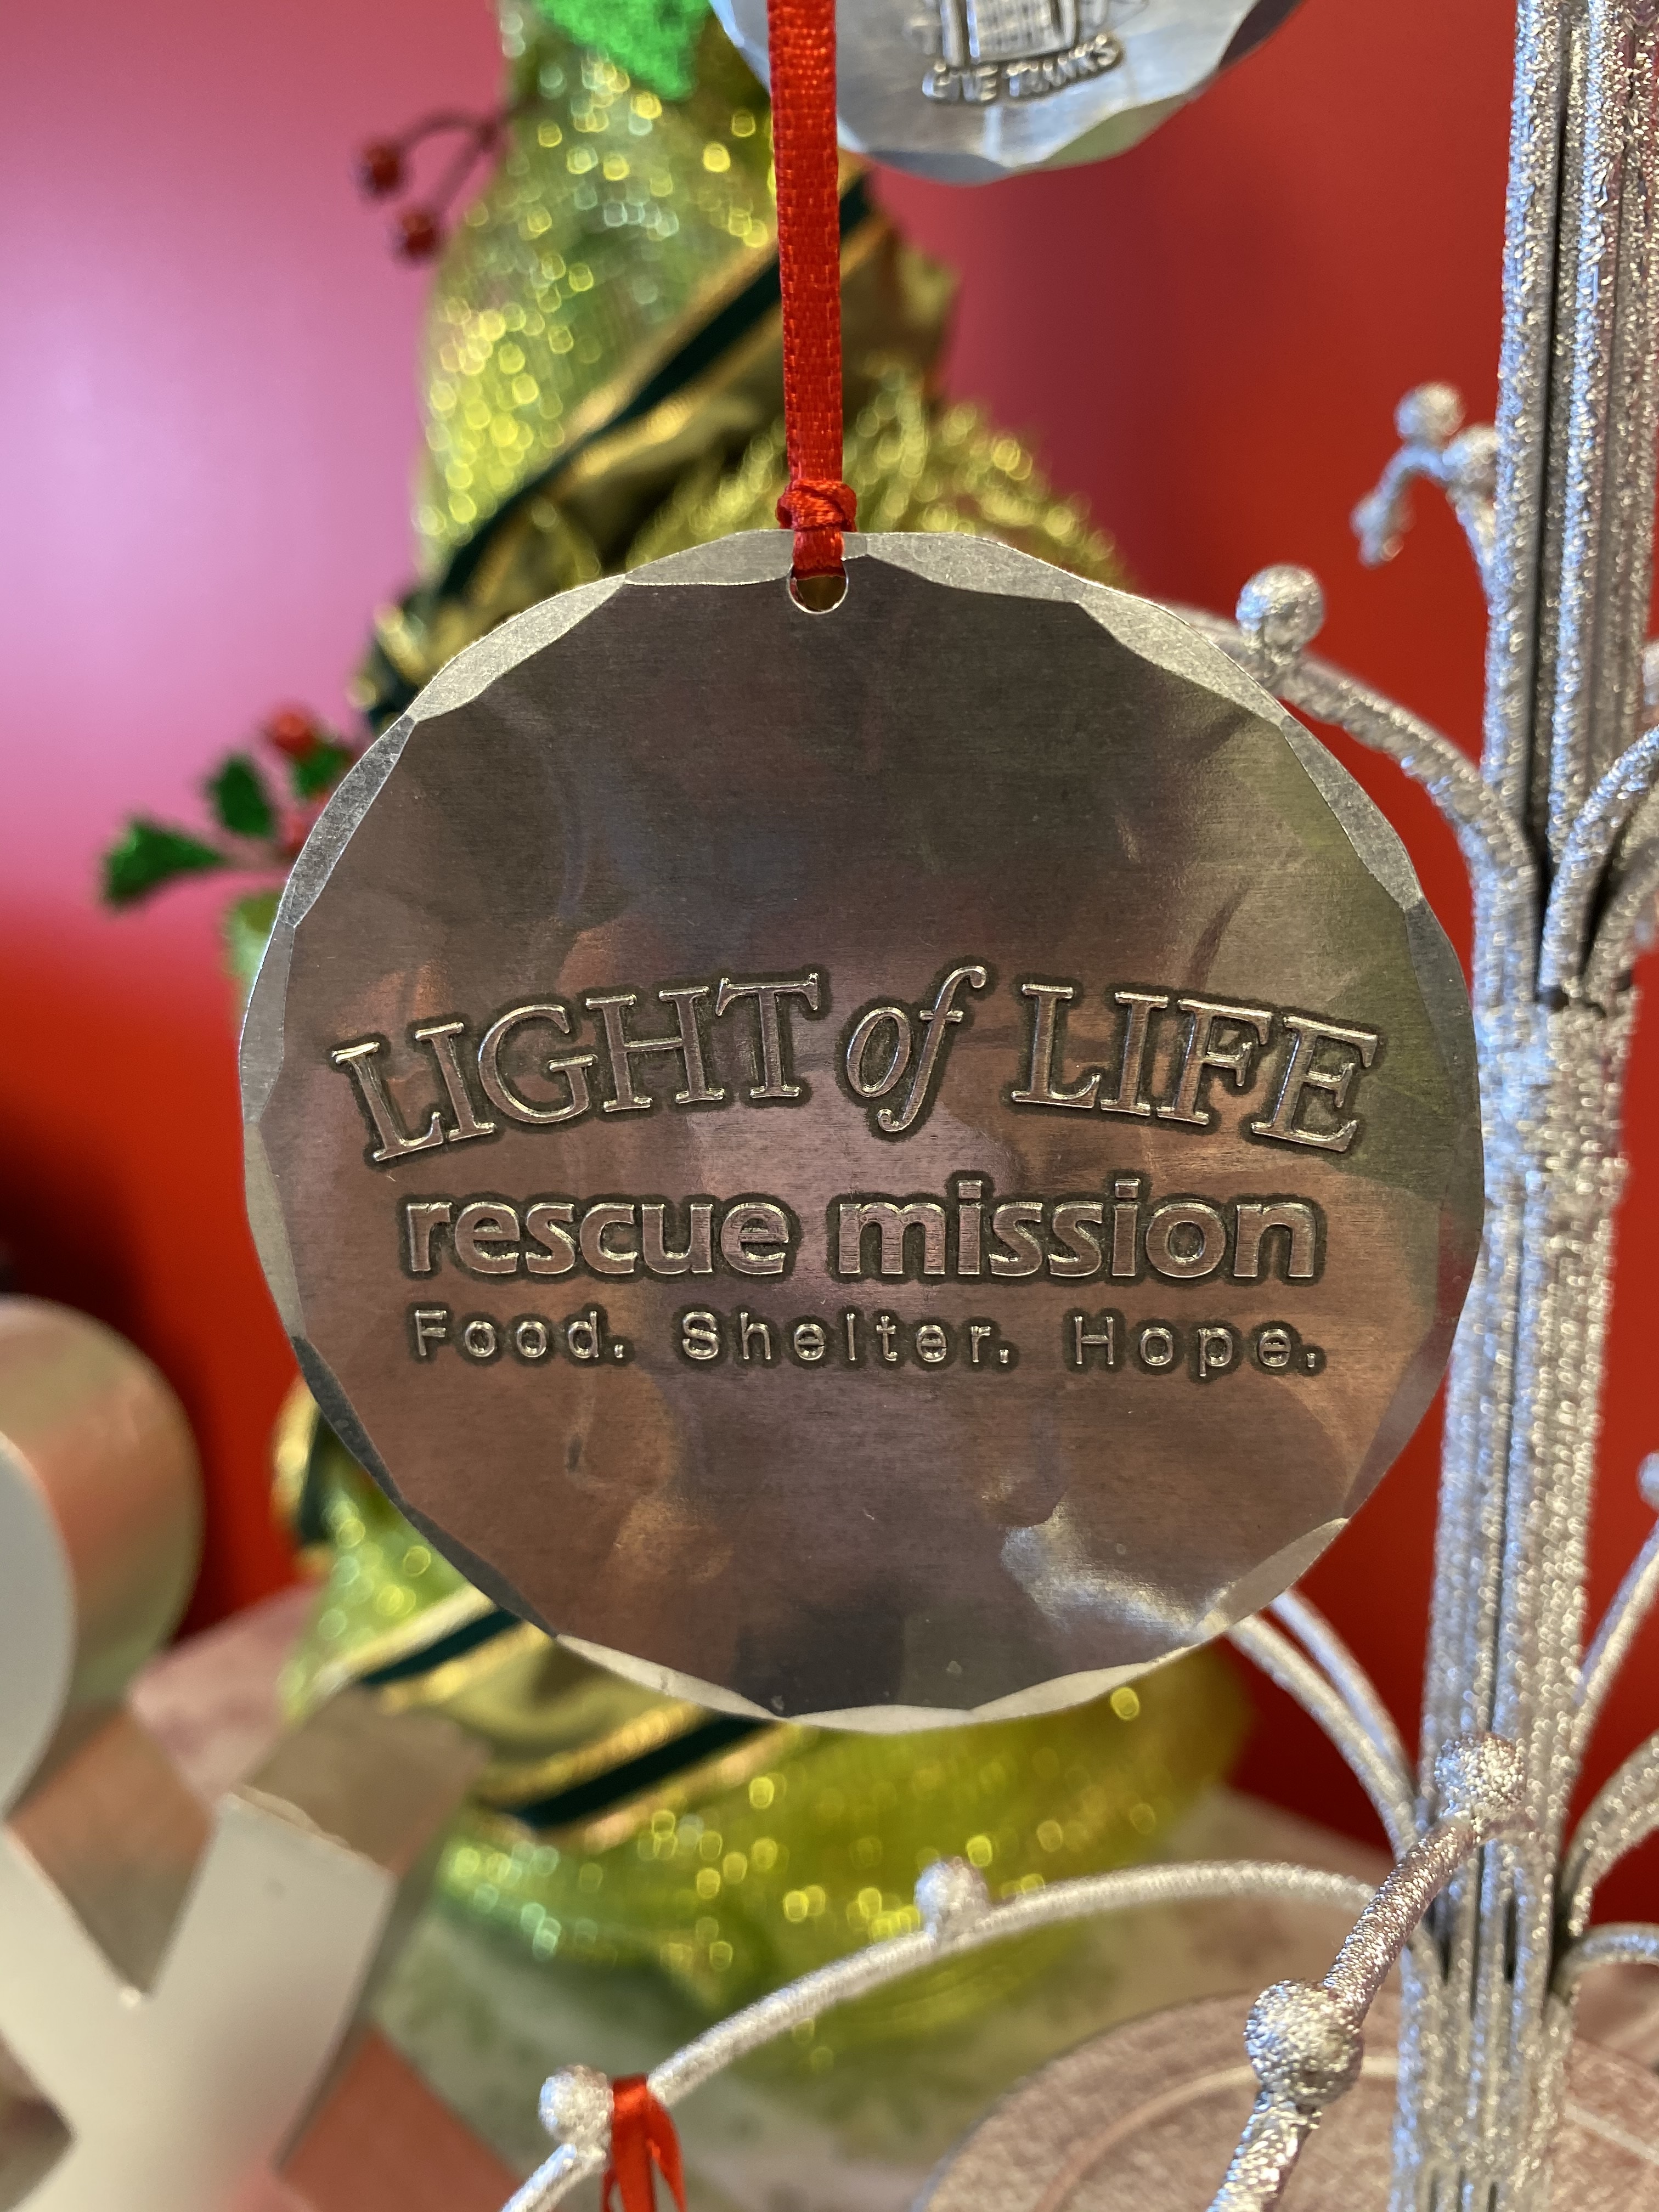 R&Q Cares: Supporting Light of Life Rescue Mission